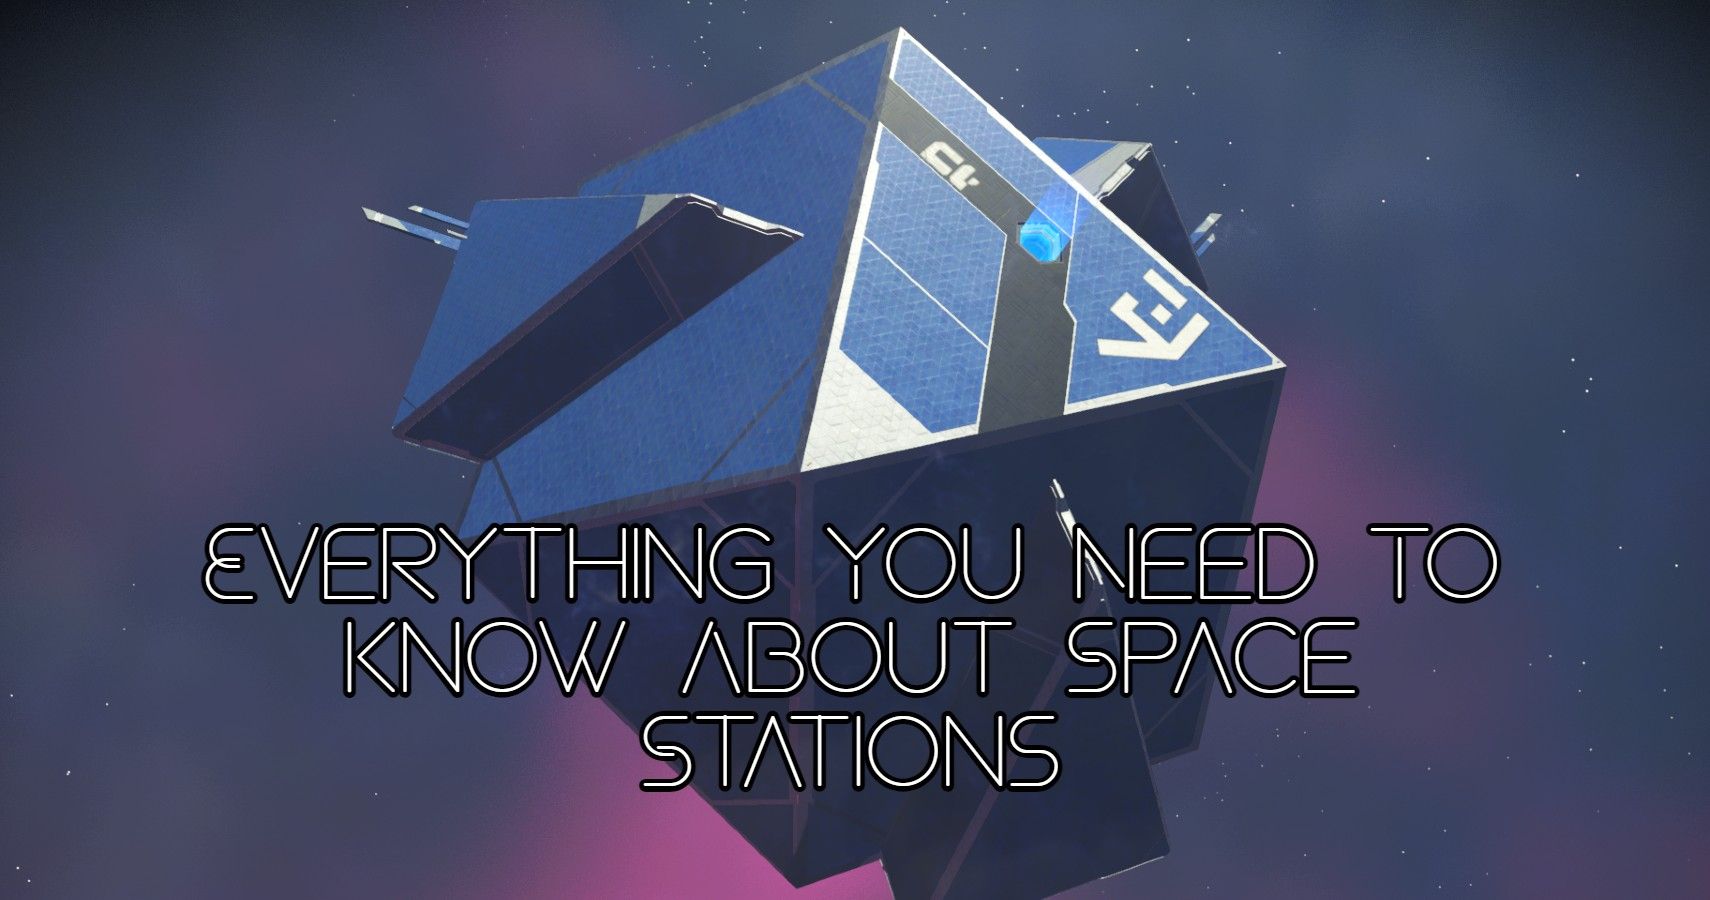 No Man's Sky: Everything You Need To Know About Space Stations